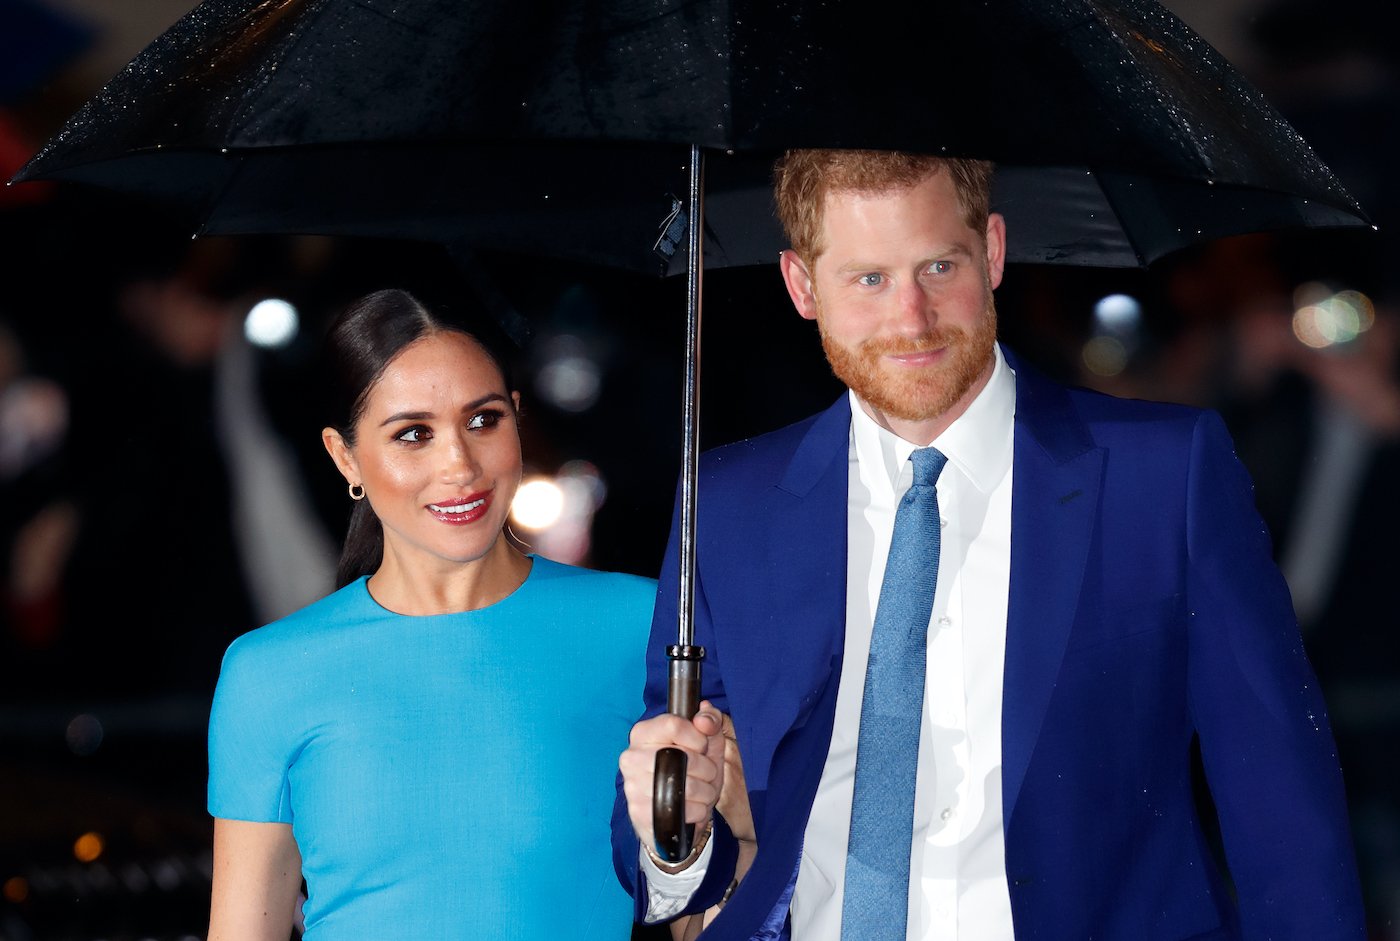 Meghan Markle and Prince Harry arrive at the Endeavour Fund Awards walking under an umbrella